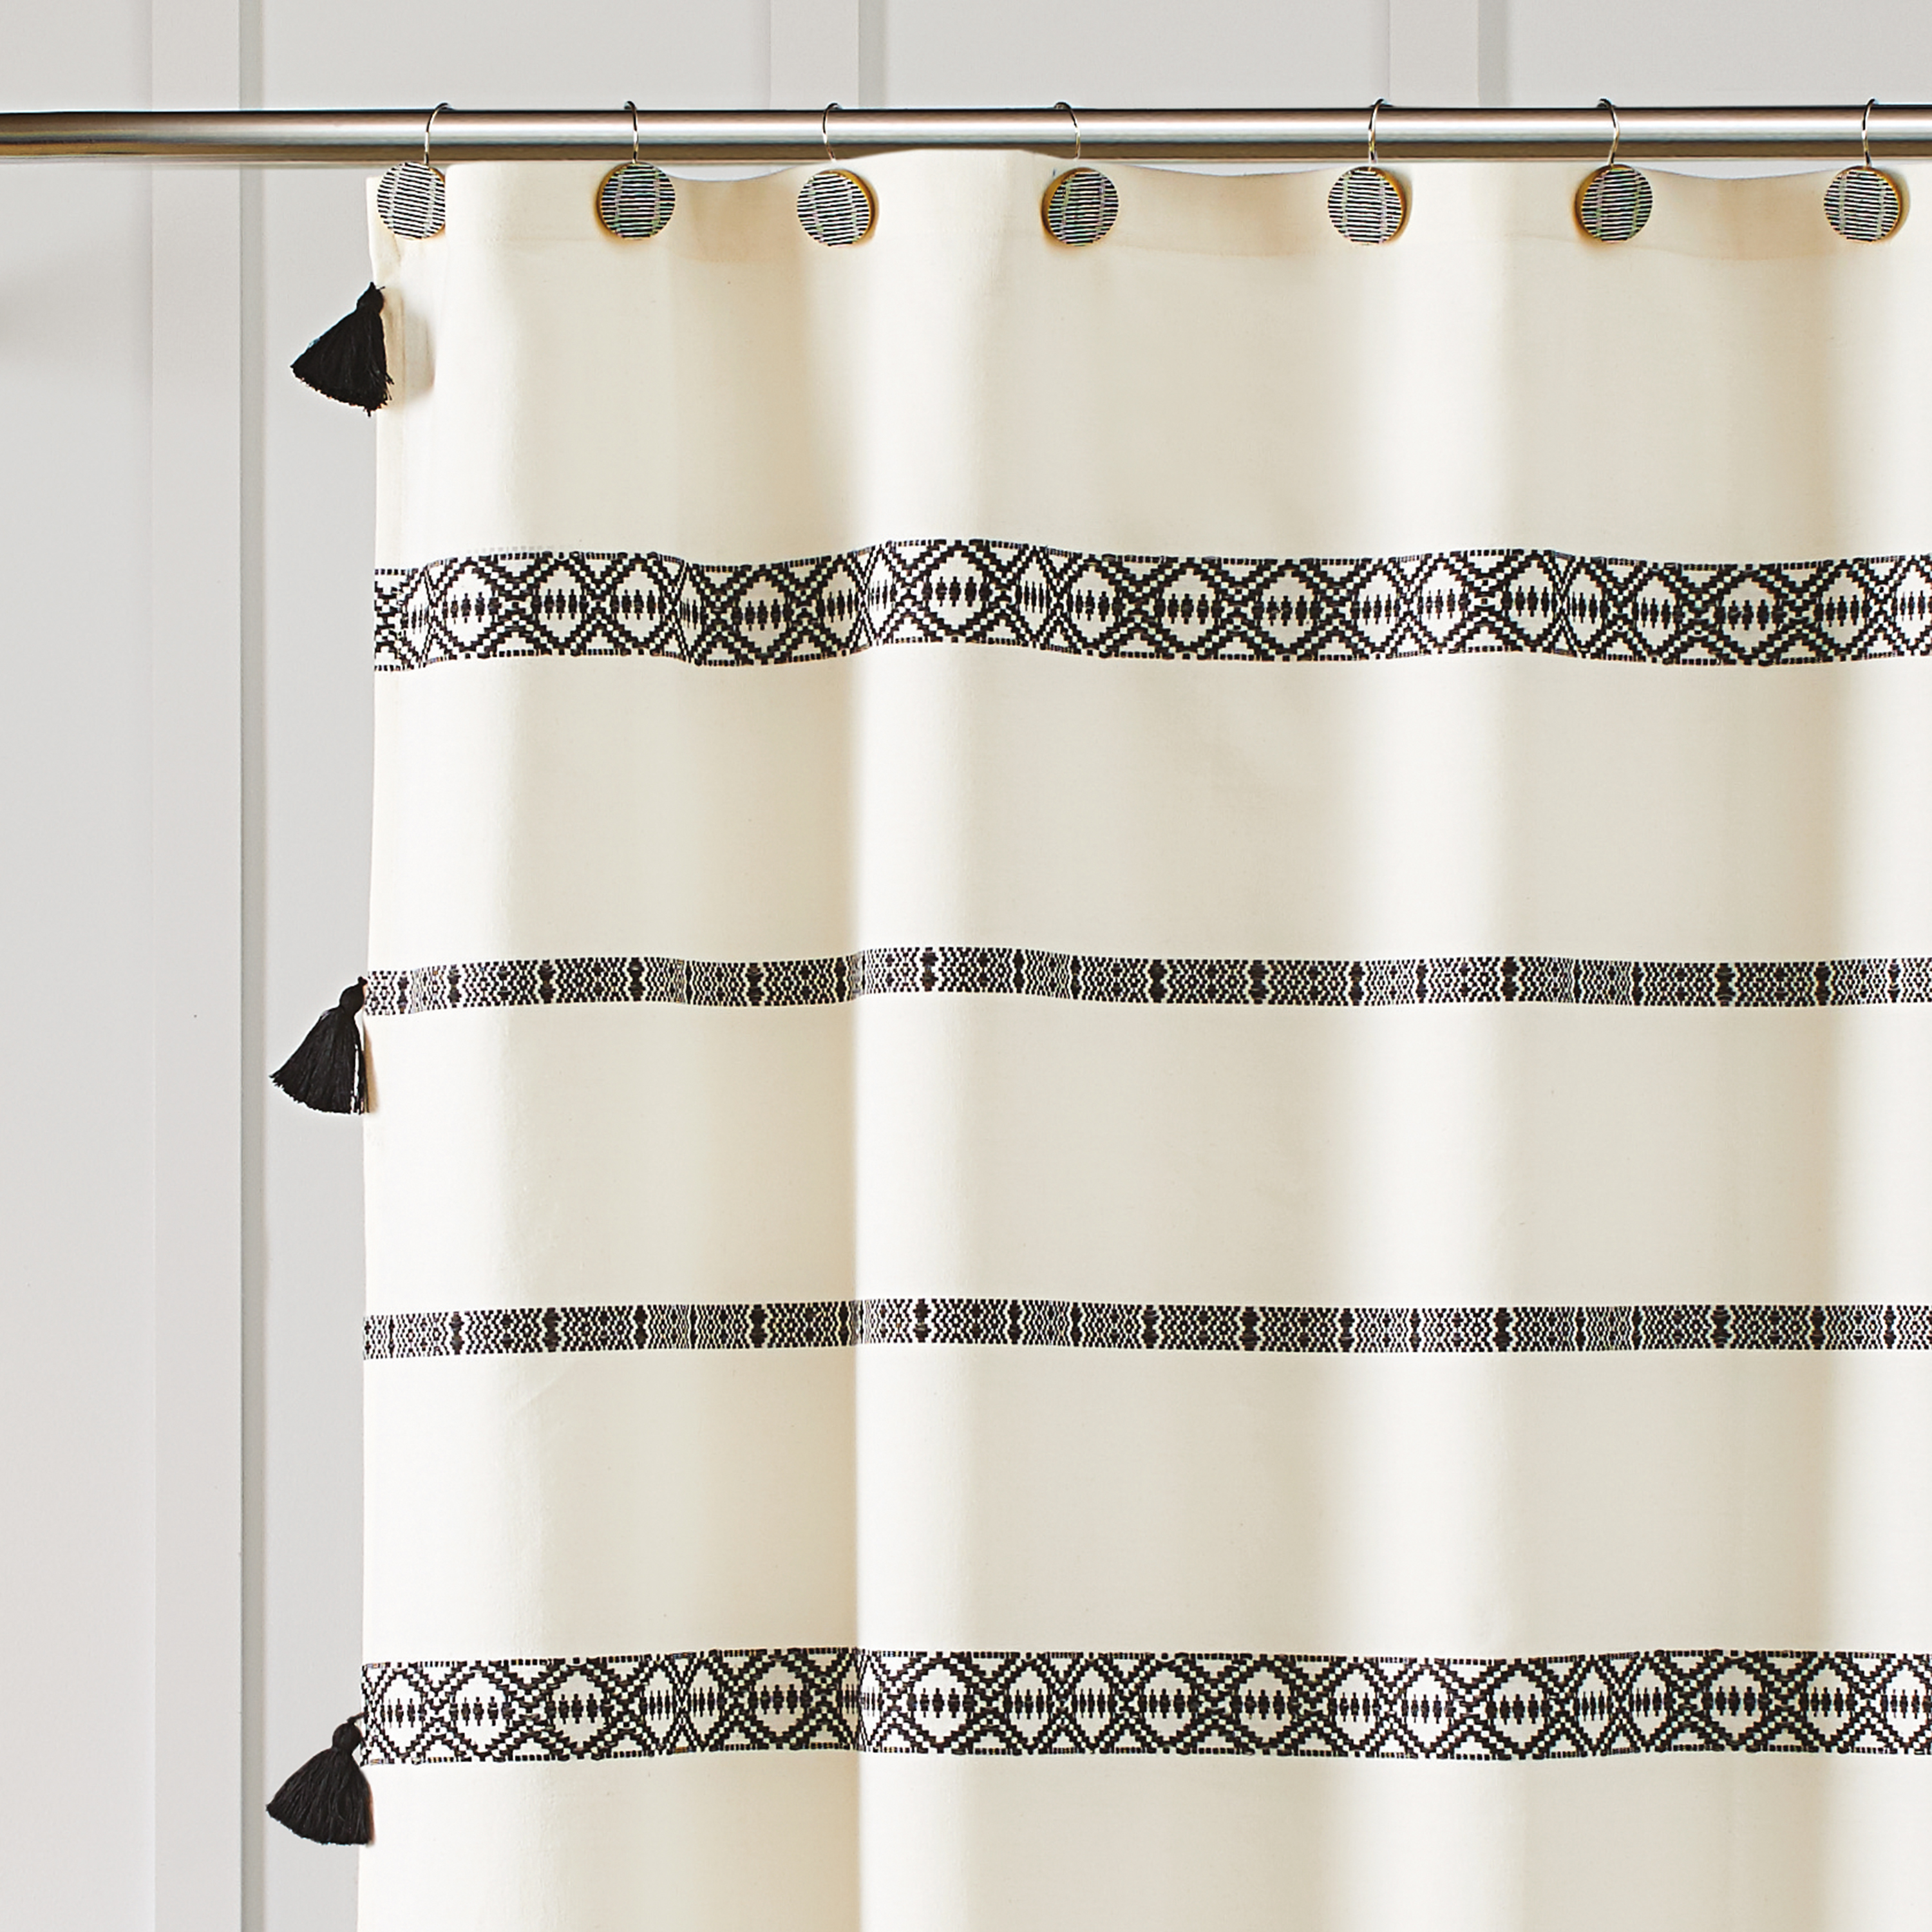 Boho Chic Polyester and Cotton Shower Curtain, Black, Better Homes & Gardens, 72" x 72" - image 2 of 9